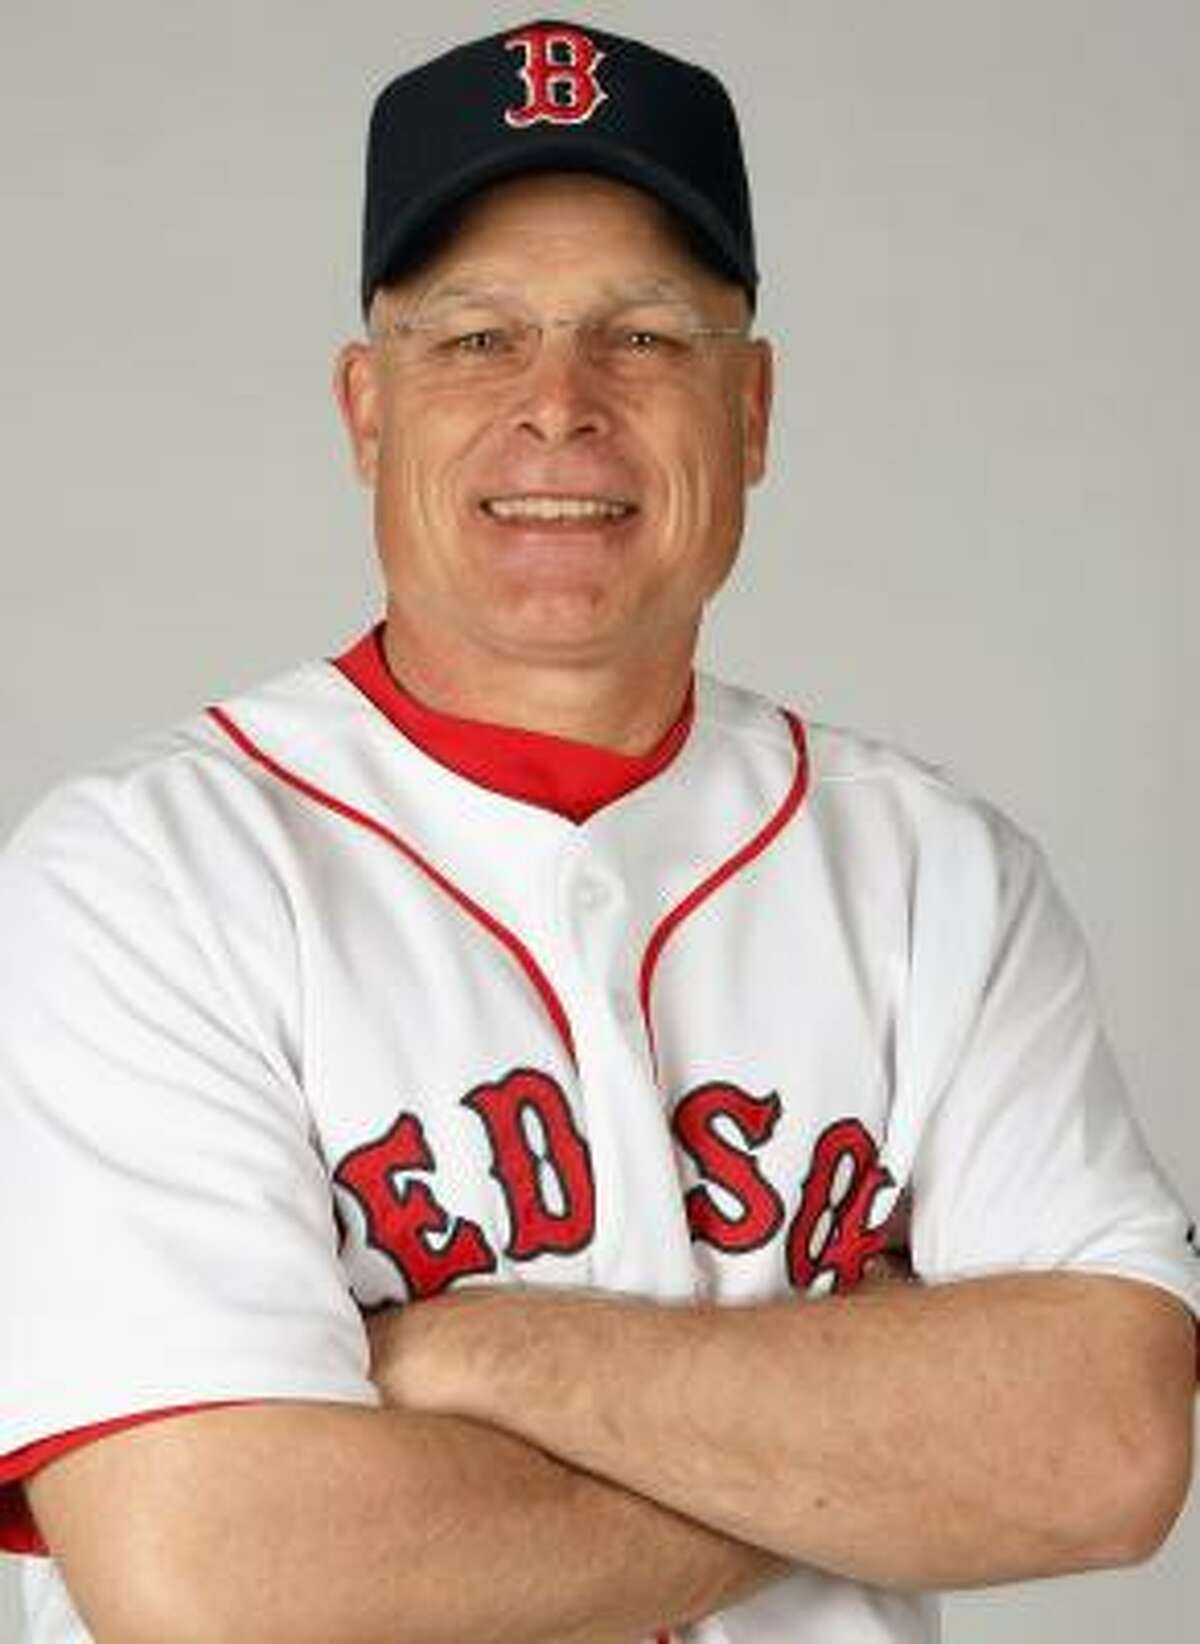 Brad Mills has spent the last six seasons as bench coach for the Boston Red Sox.